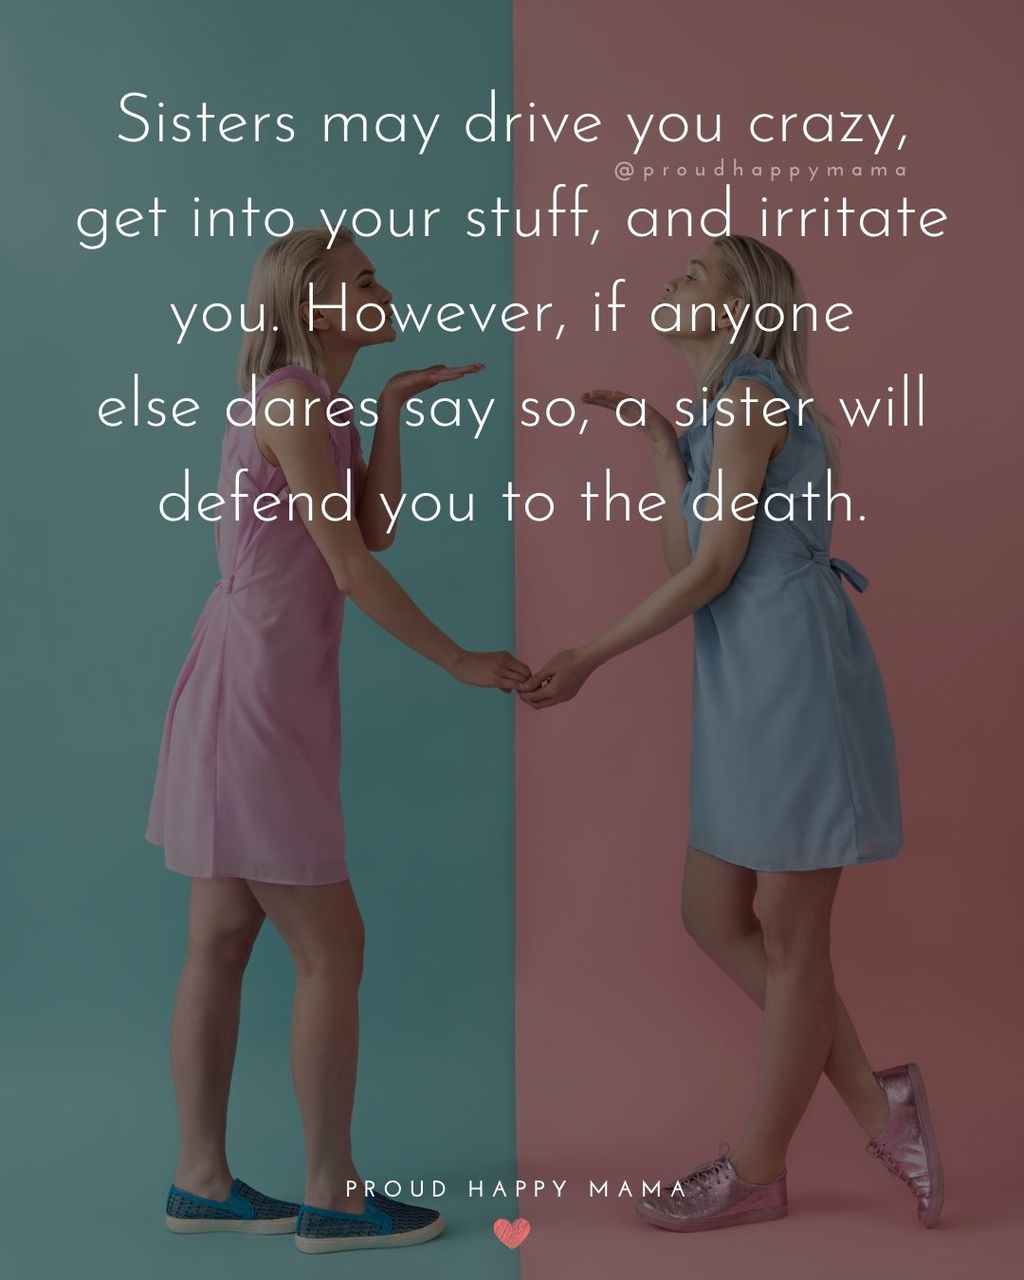 Sister Quotes - Sisters may drive you crazy, get into your stuff, and irritate you. However, if anyone else dares say so, a sister will defend you to the death.